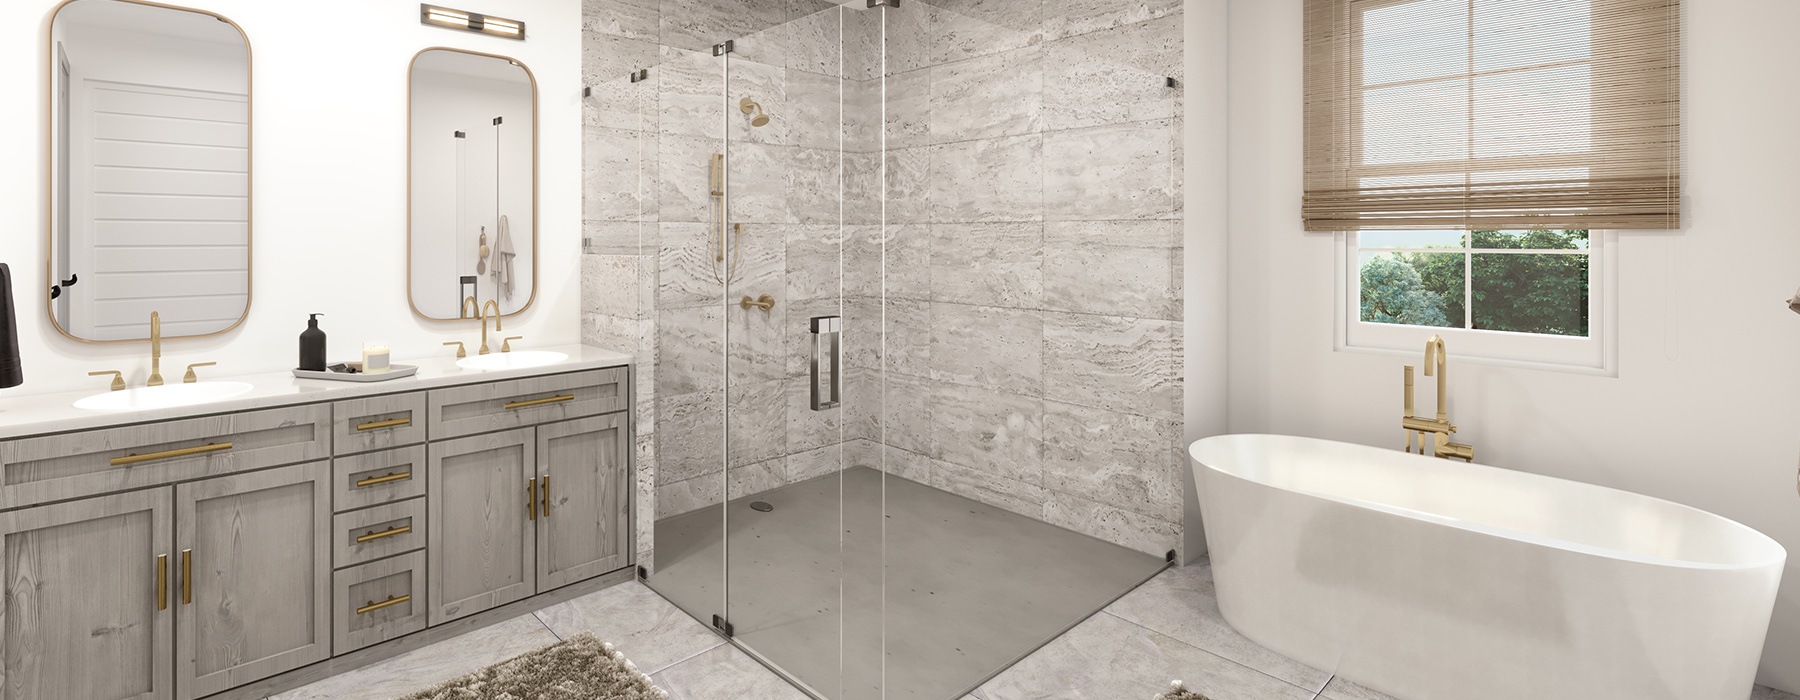 Large well lit bathroom with a large glass shower 